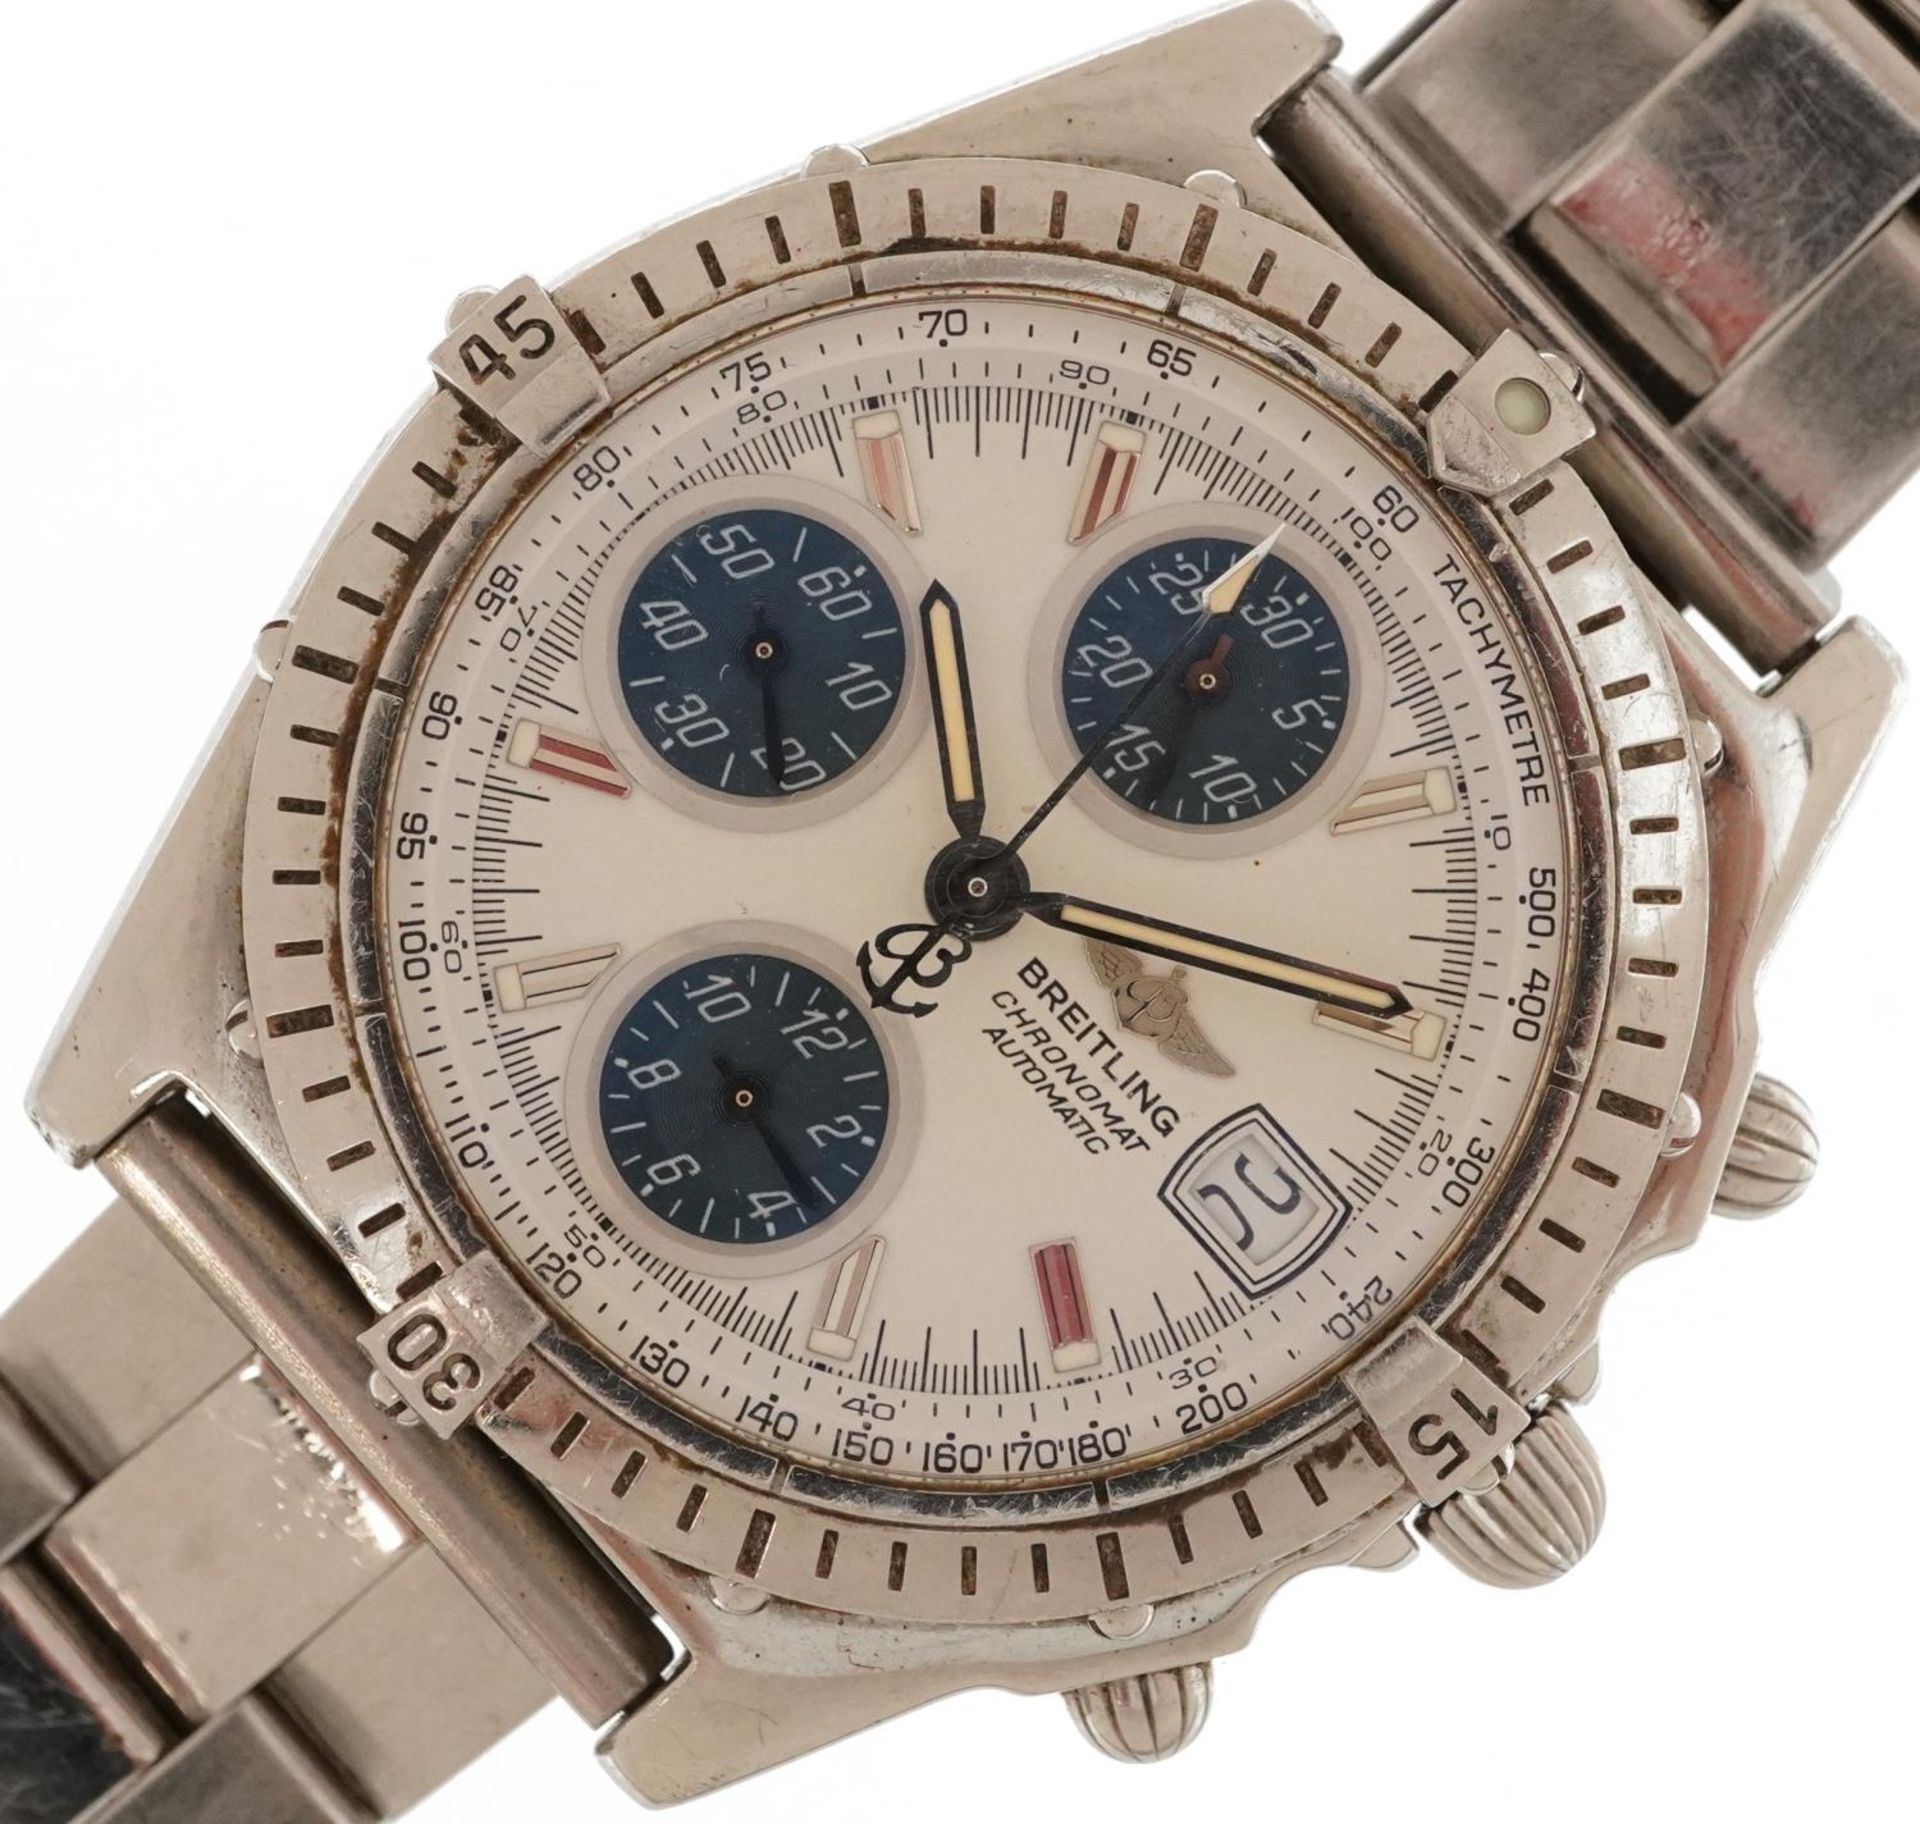 Breitling, gentlemen's Breitling Chronomat automatic wristwatch with date aperture and leather